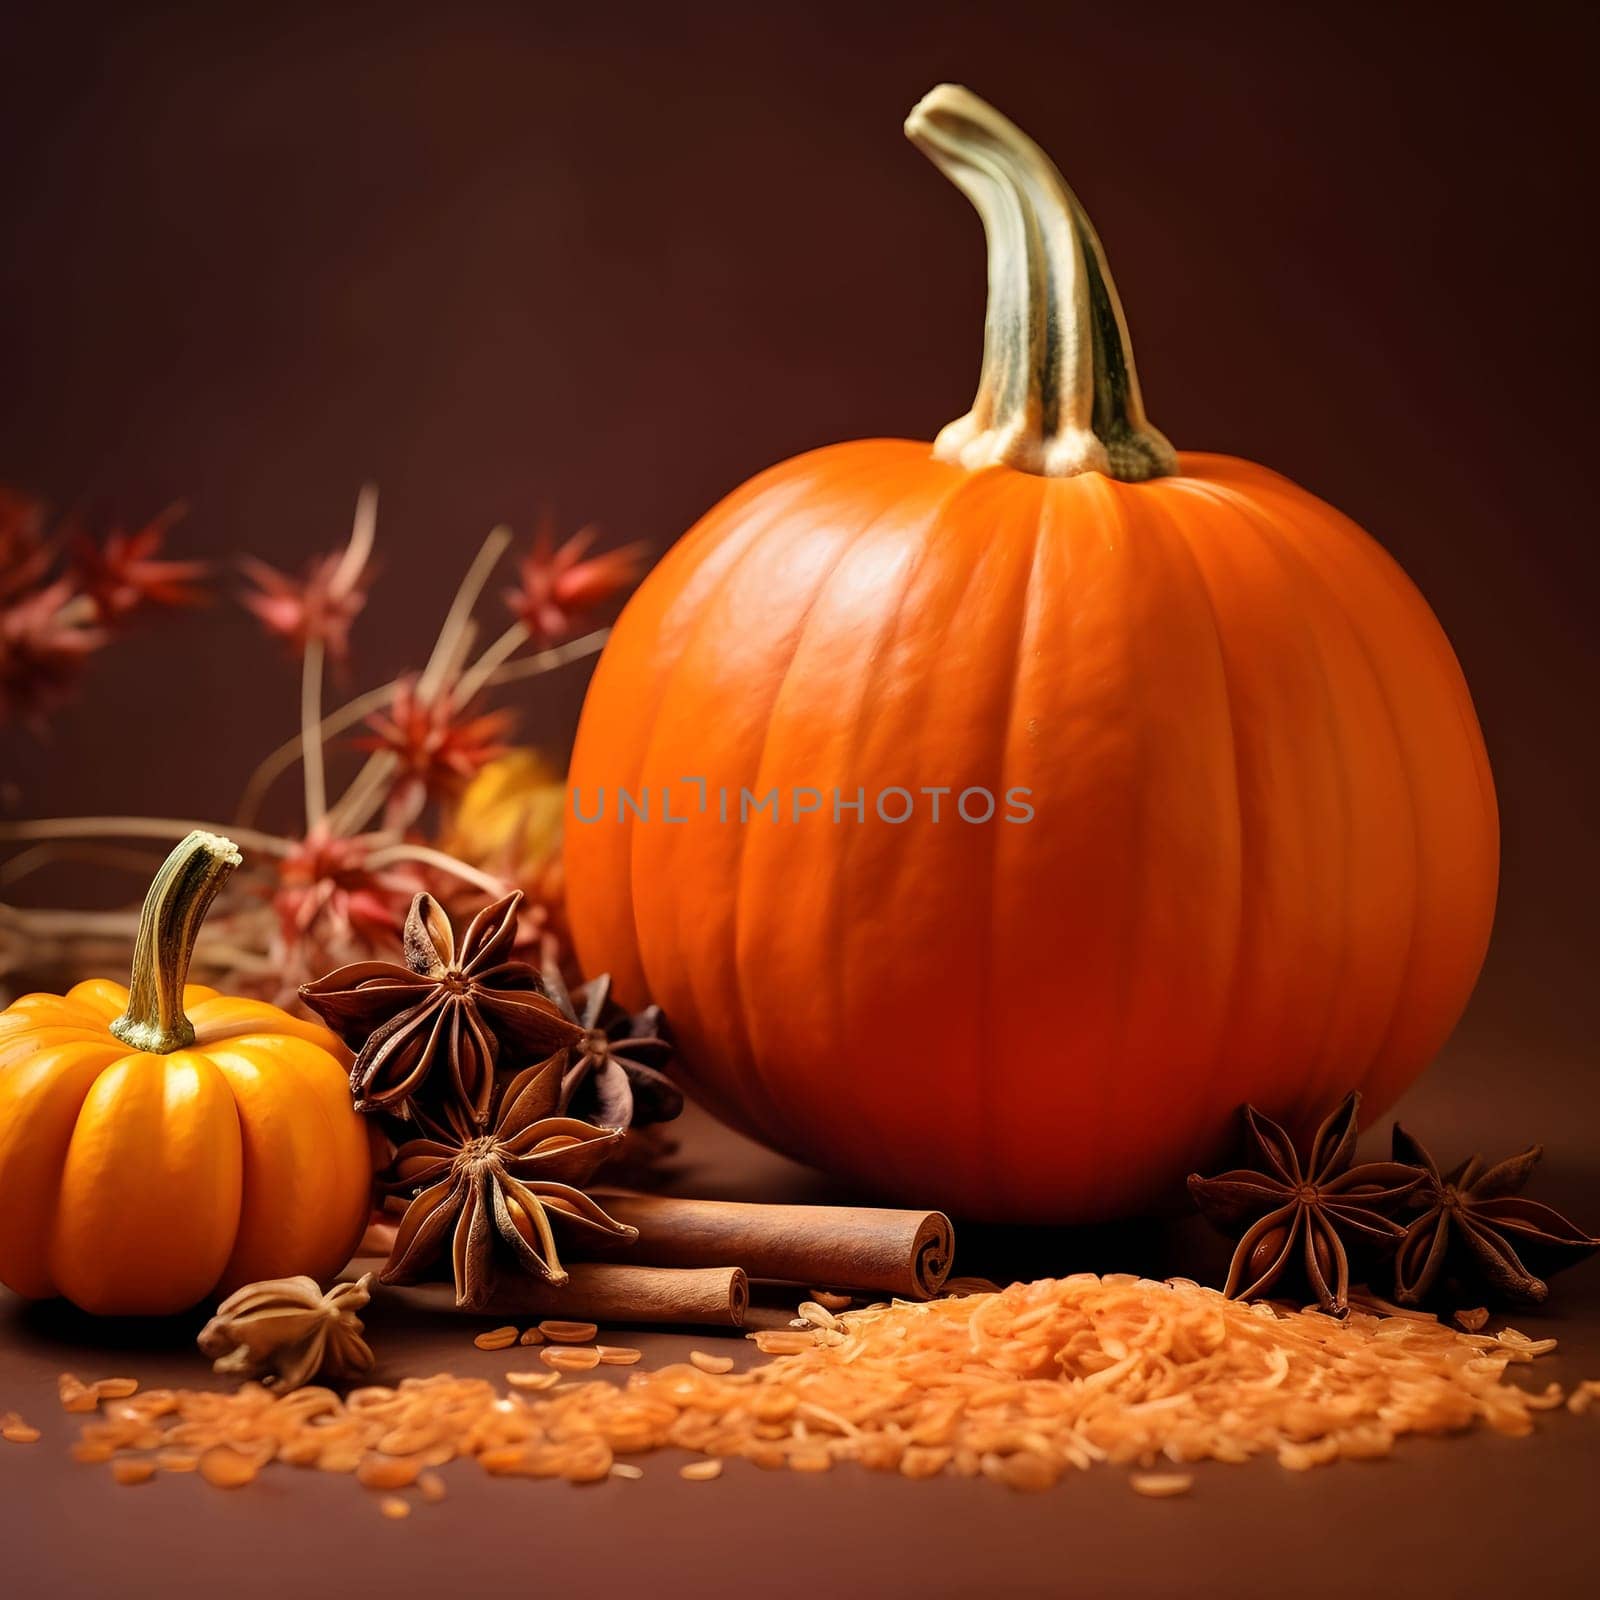 Orange, large and small pumpkin, pumpkin seeds and flowers, dark smudged background. Pumpkin as a dish of thanksgiving for the harvest. An atmosphere of joy and celebration.